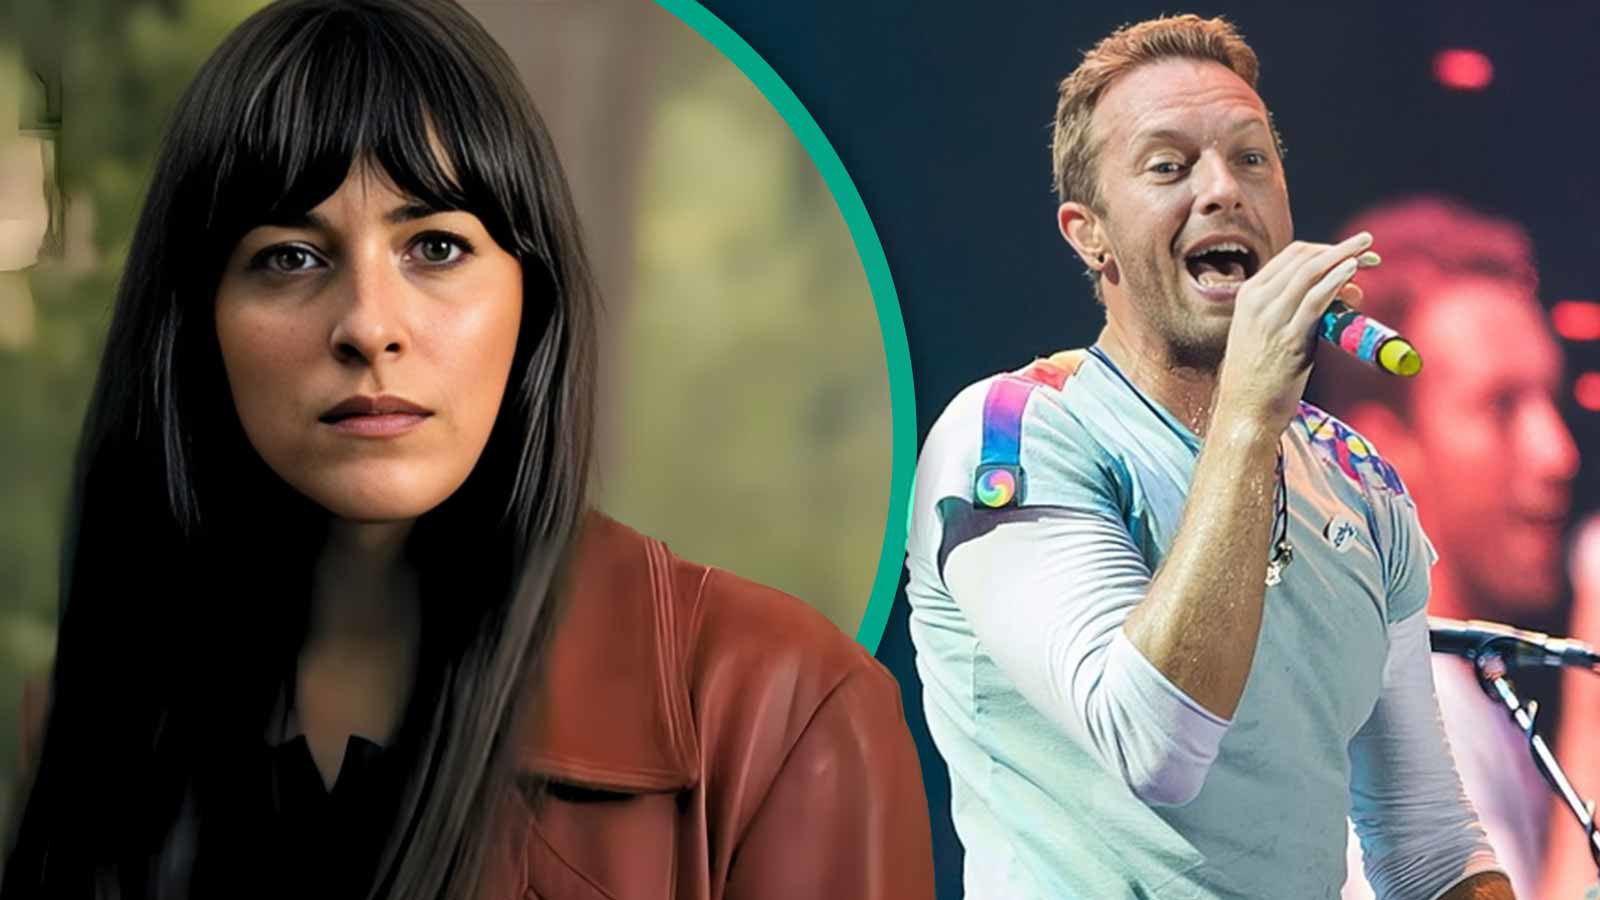 “It’s always been a bone of contention”: Dakota Johnson and Chris Martin Are Having “blow-ups” Over His Overly Close Friendship With a Marvel Actress – Insider Claims